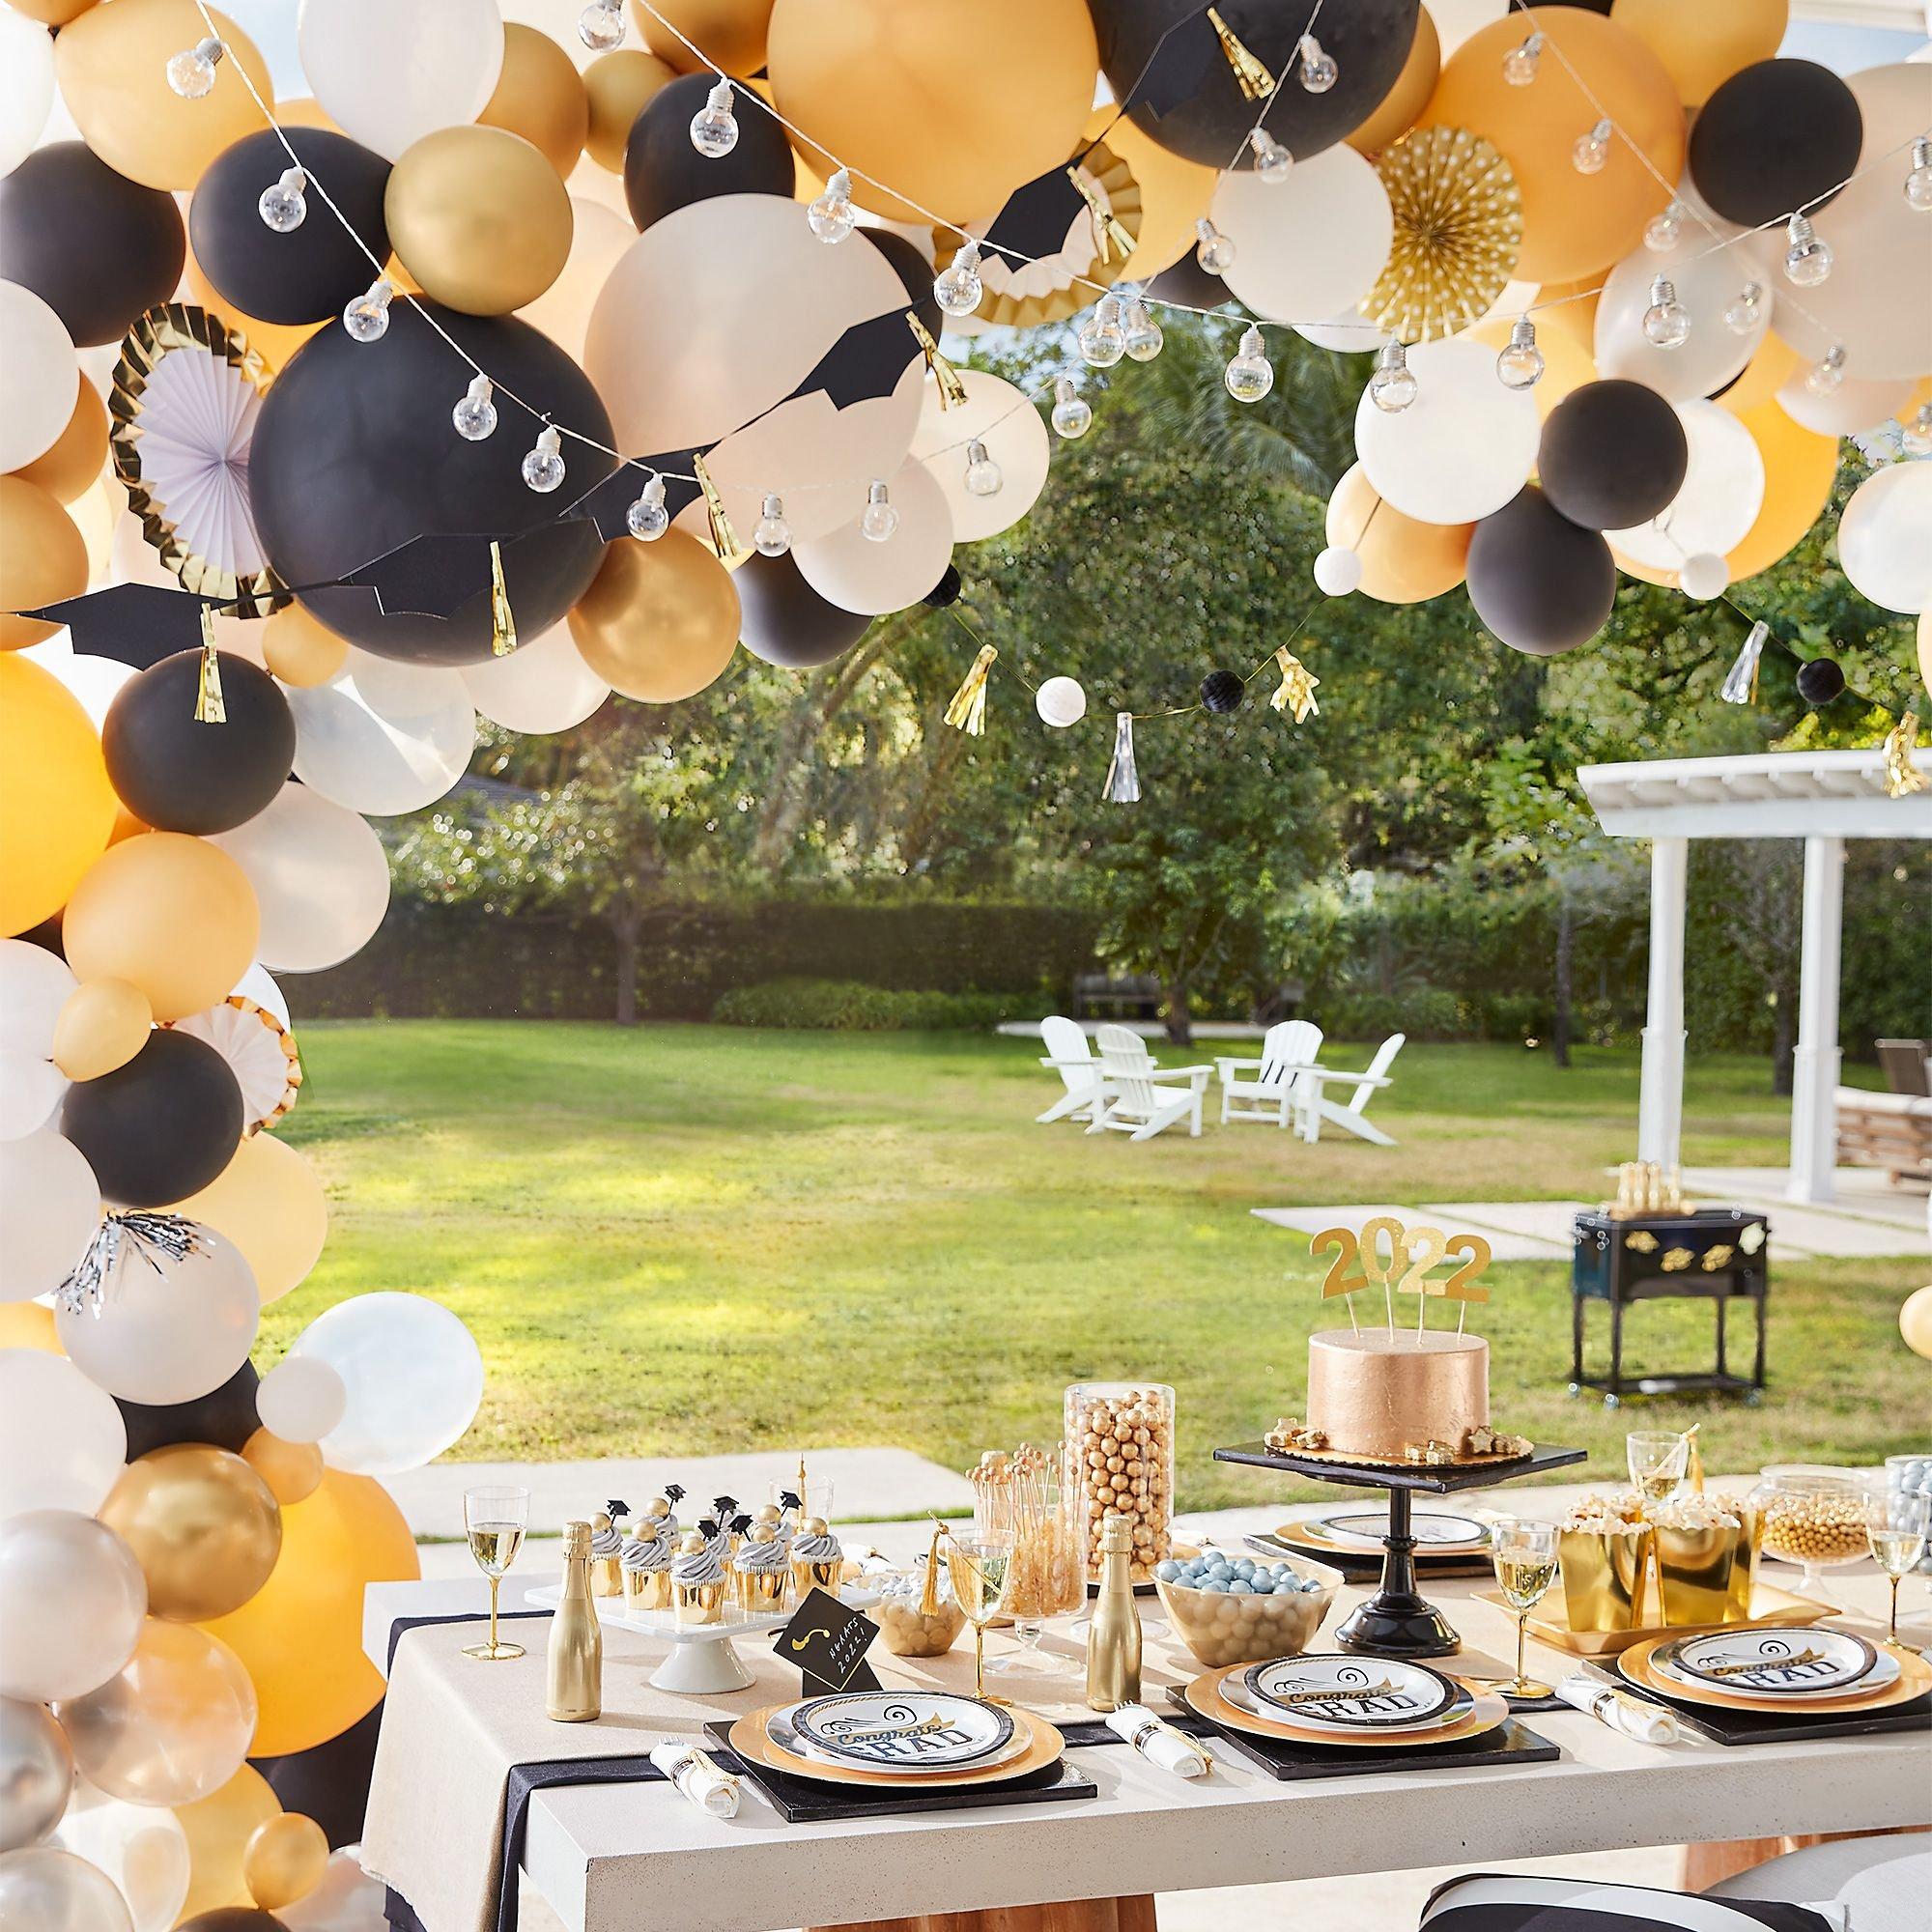 22nd Birthday Party Decorations Black and White Party Supplies